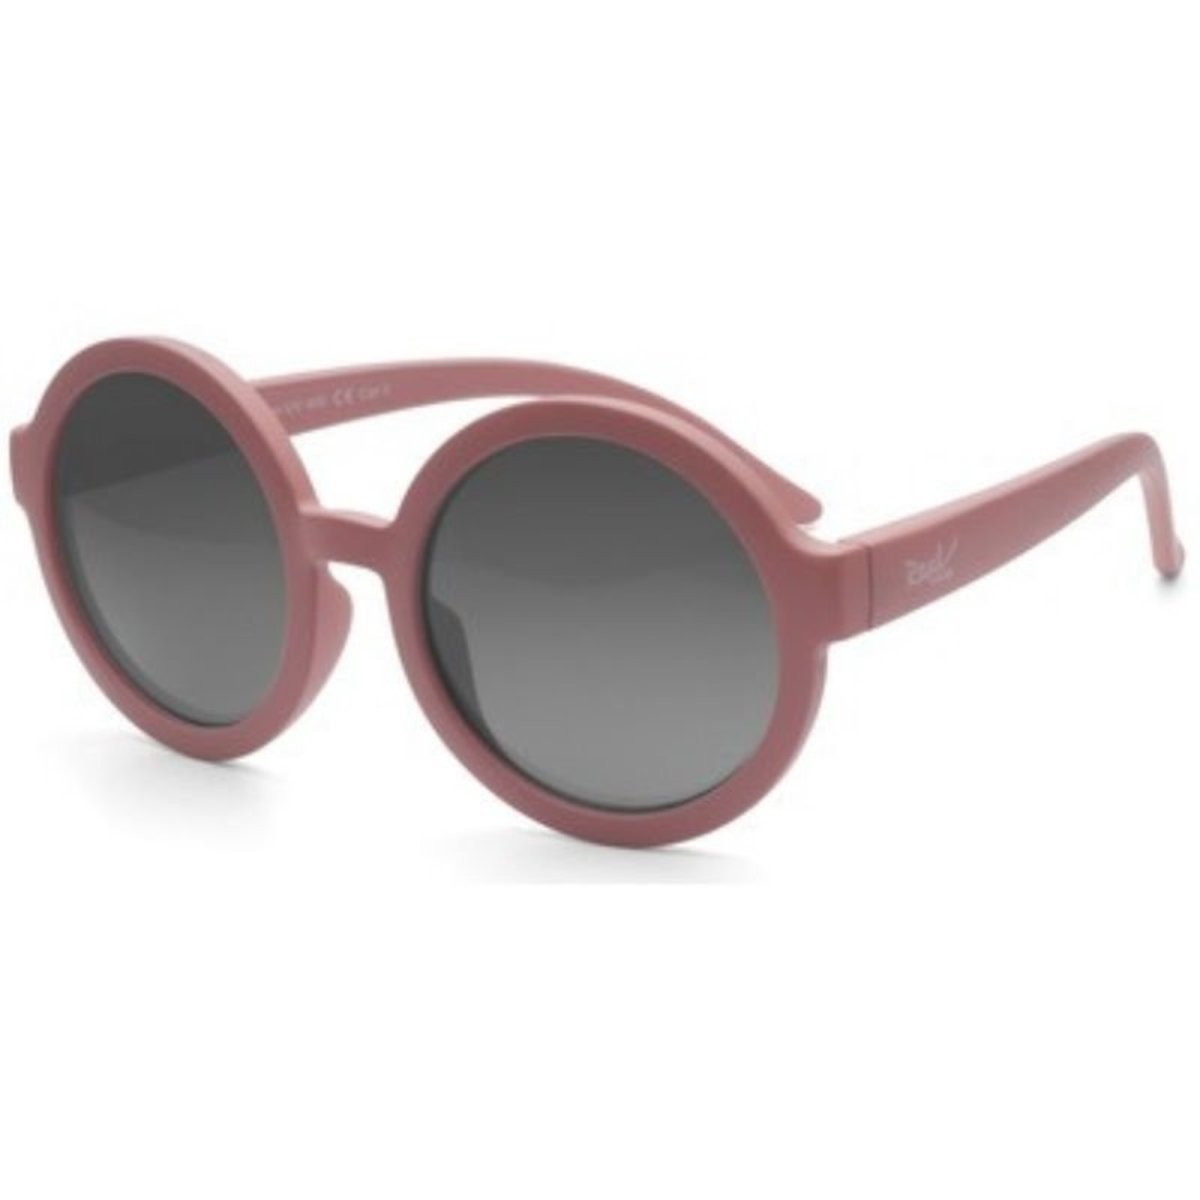 Real Shades - UV-zonnebril voor kinderen - Vibe - Mat Mauve - maat Onesize (4-6yrs)